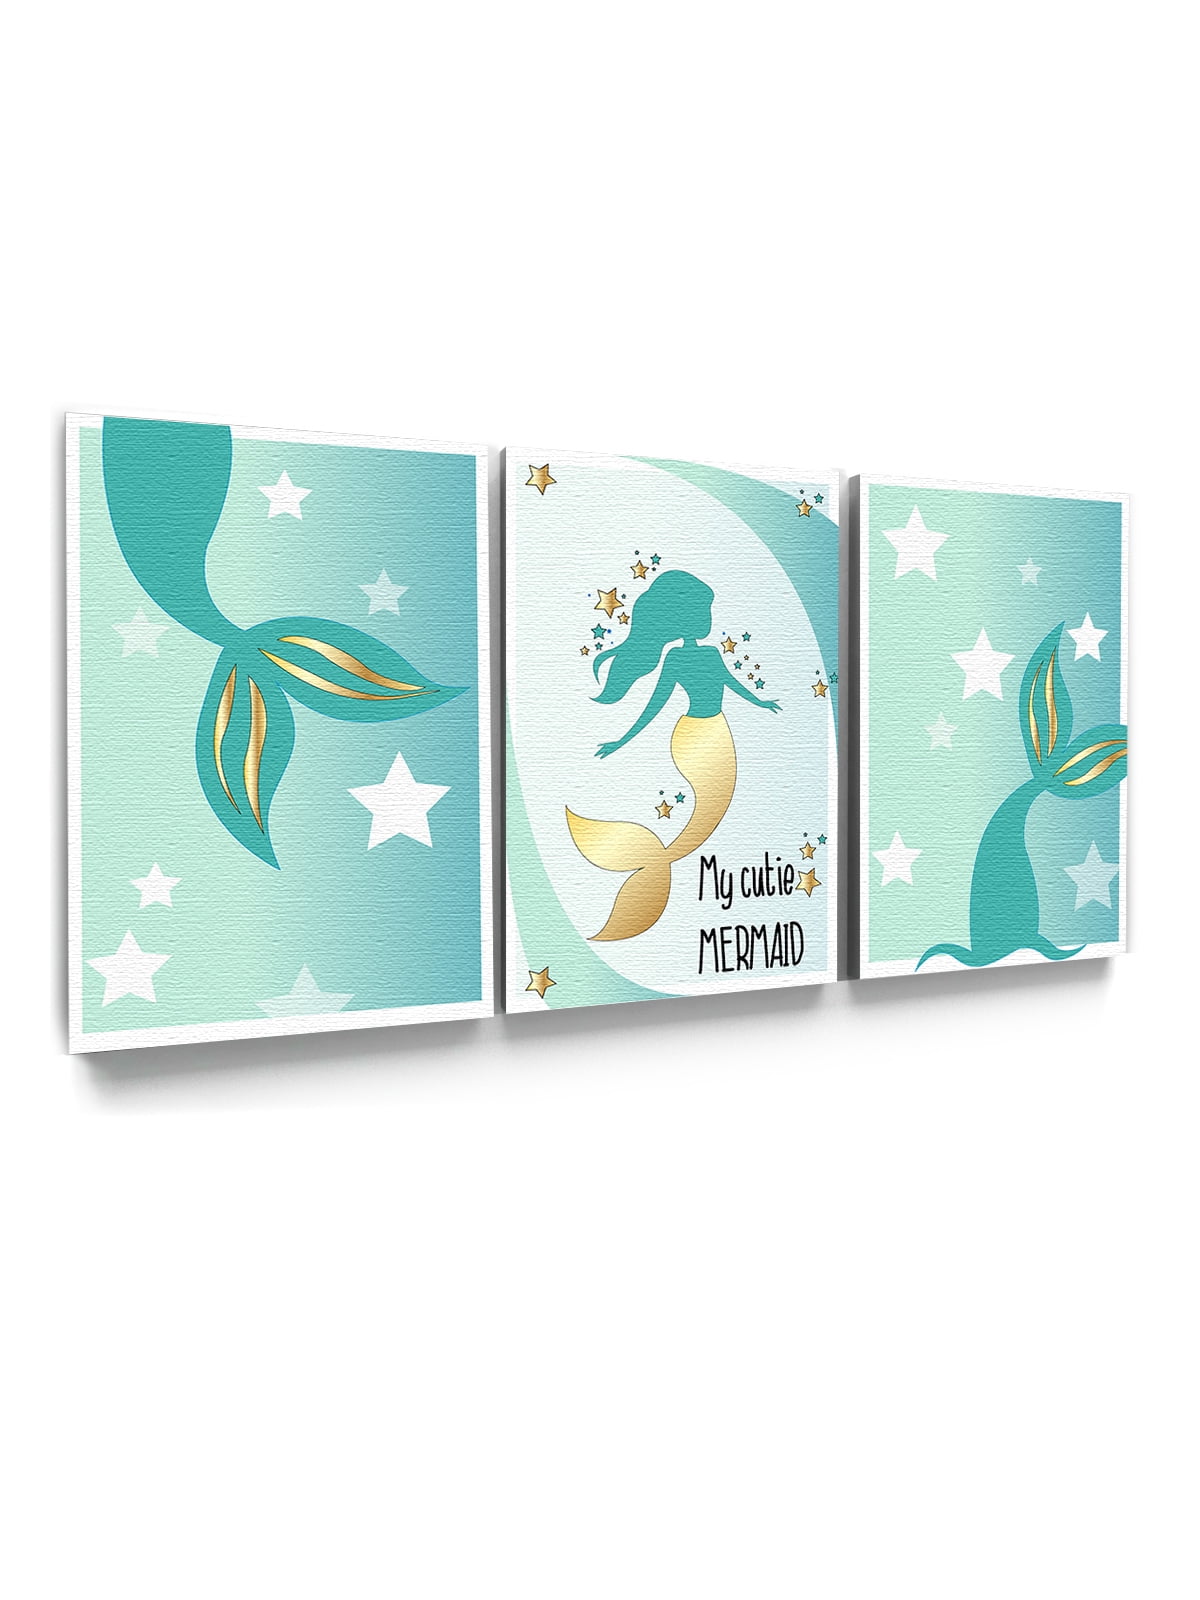 MERMAID WORLD Set 3 Canvas Wall Art Pictures Home Decor Girls Bedroom 